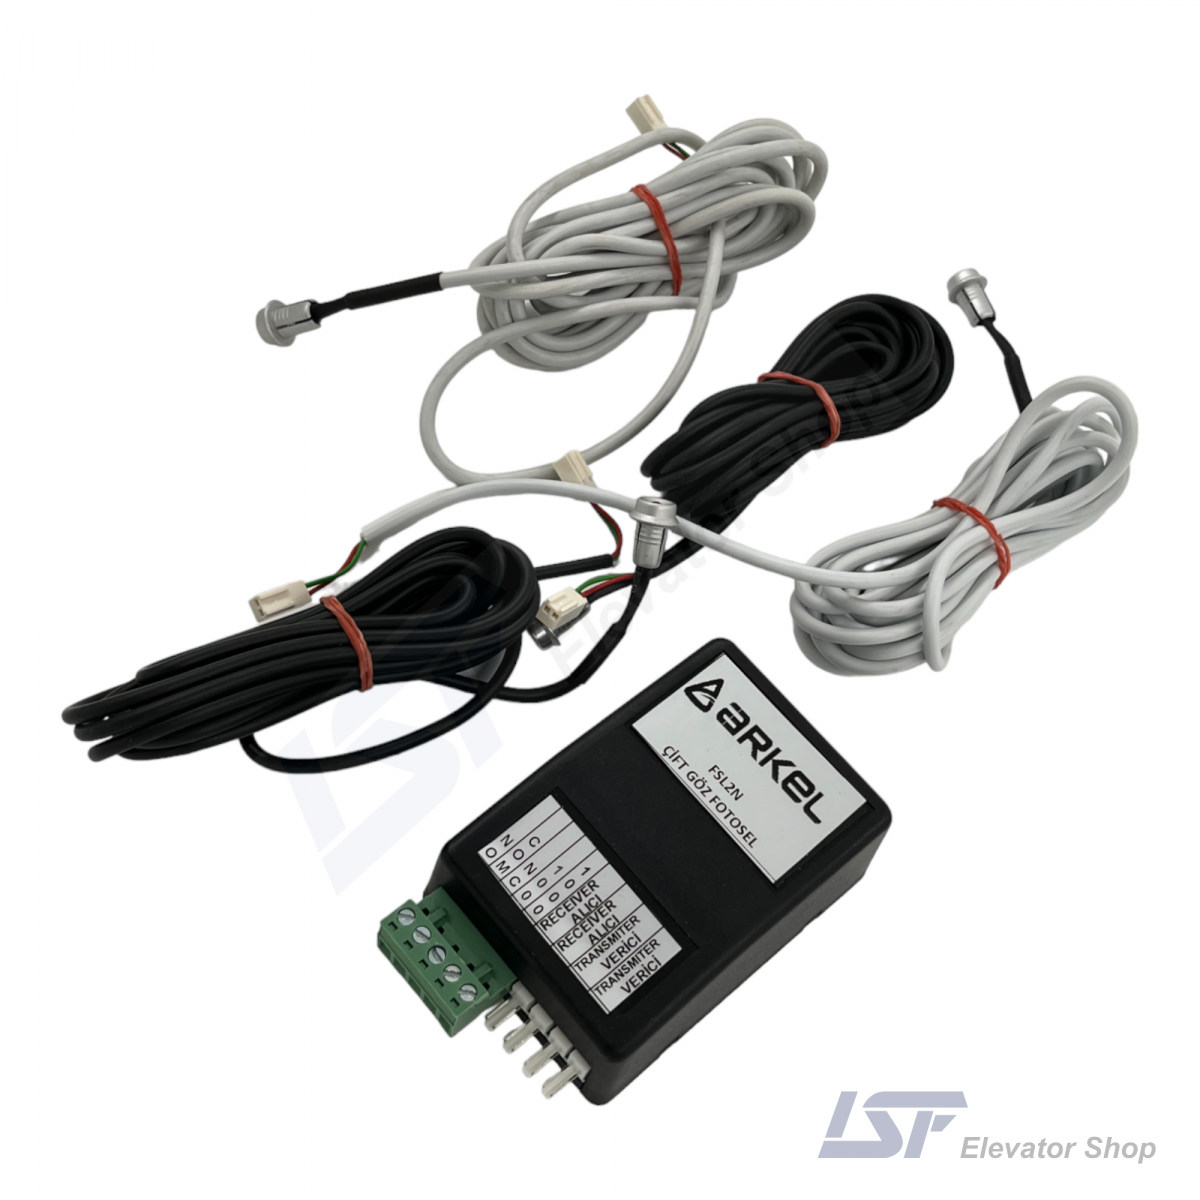 Arkel FSL-2NF Photocell With Two Sensors (4)